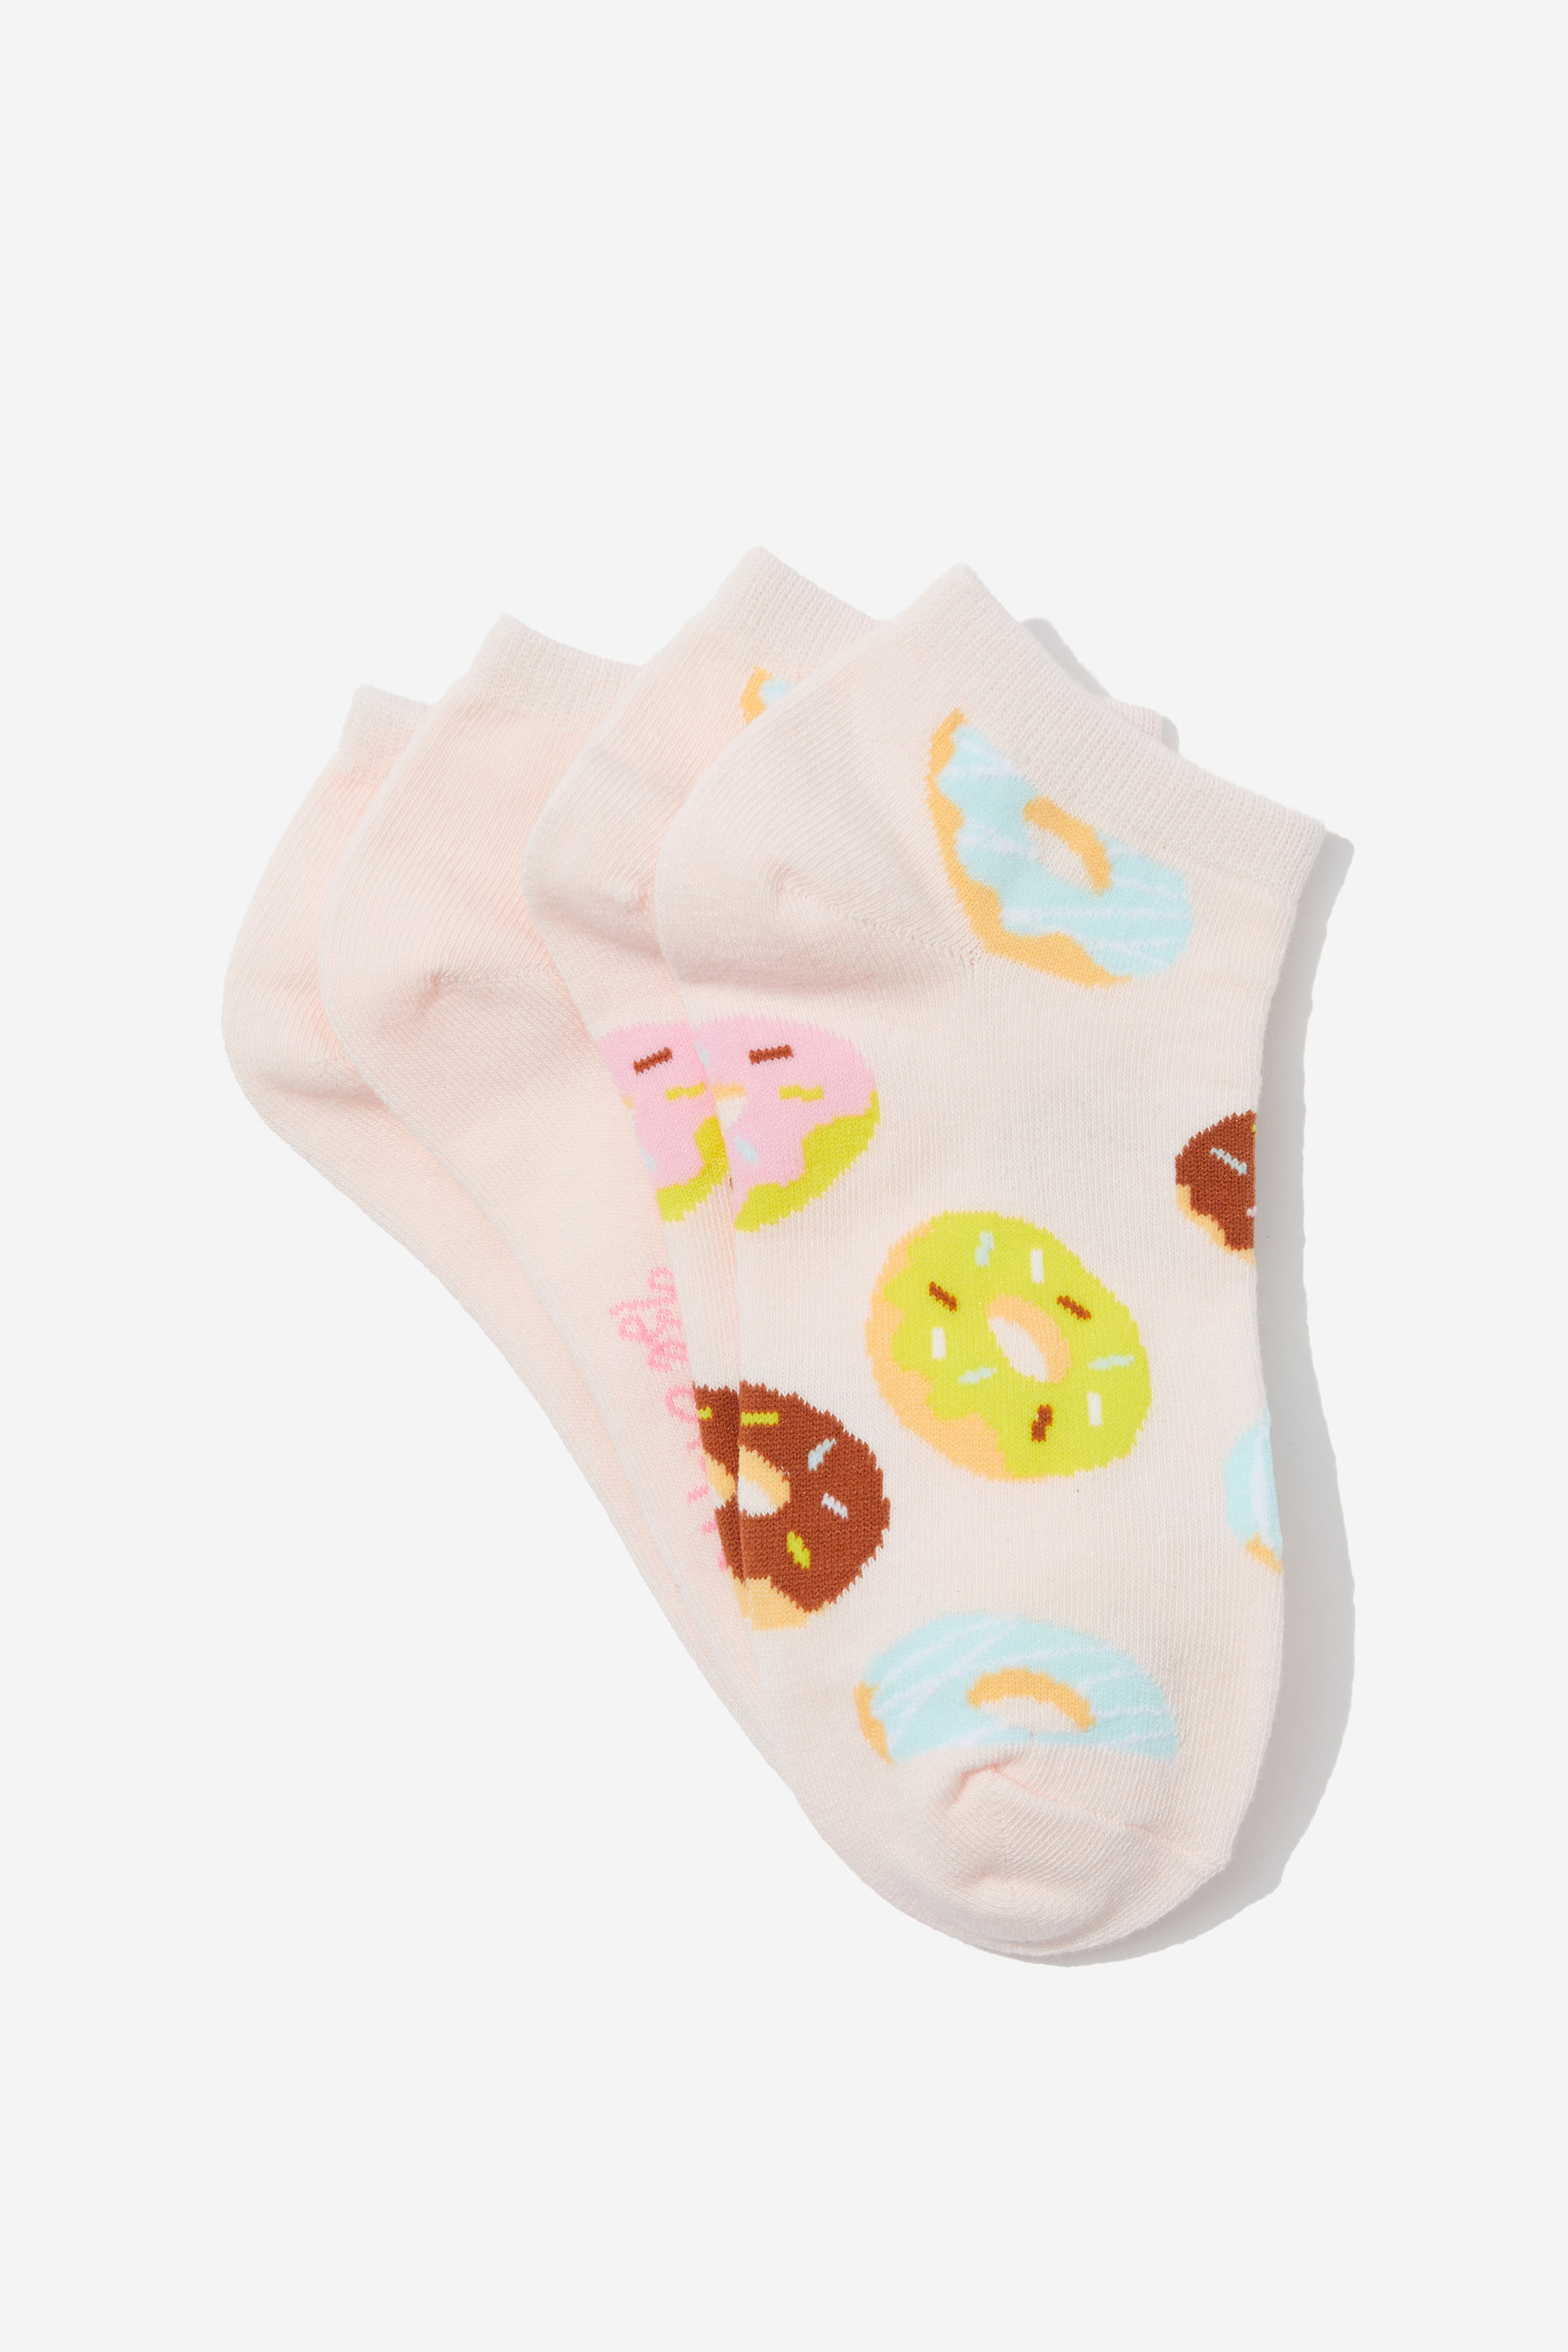 Typo - 2 Pk Of Ankle Socks - Donuts multi pink (s/m)